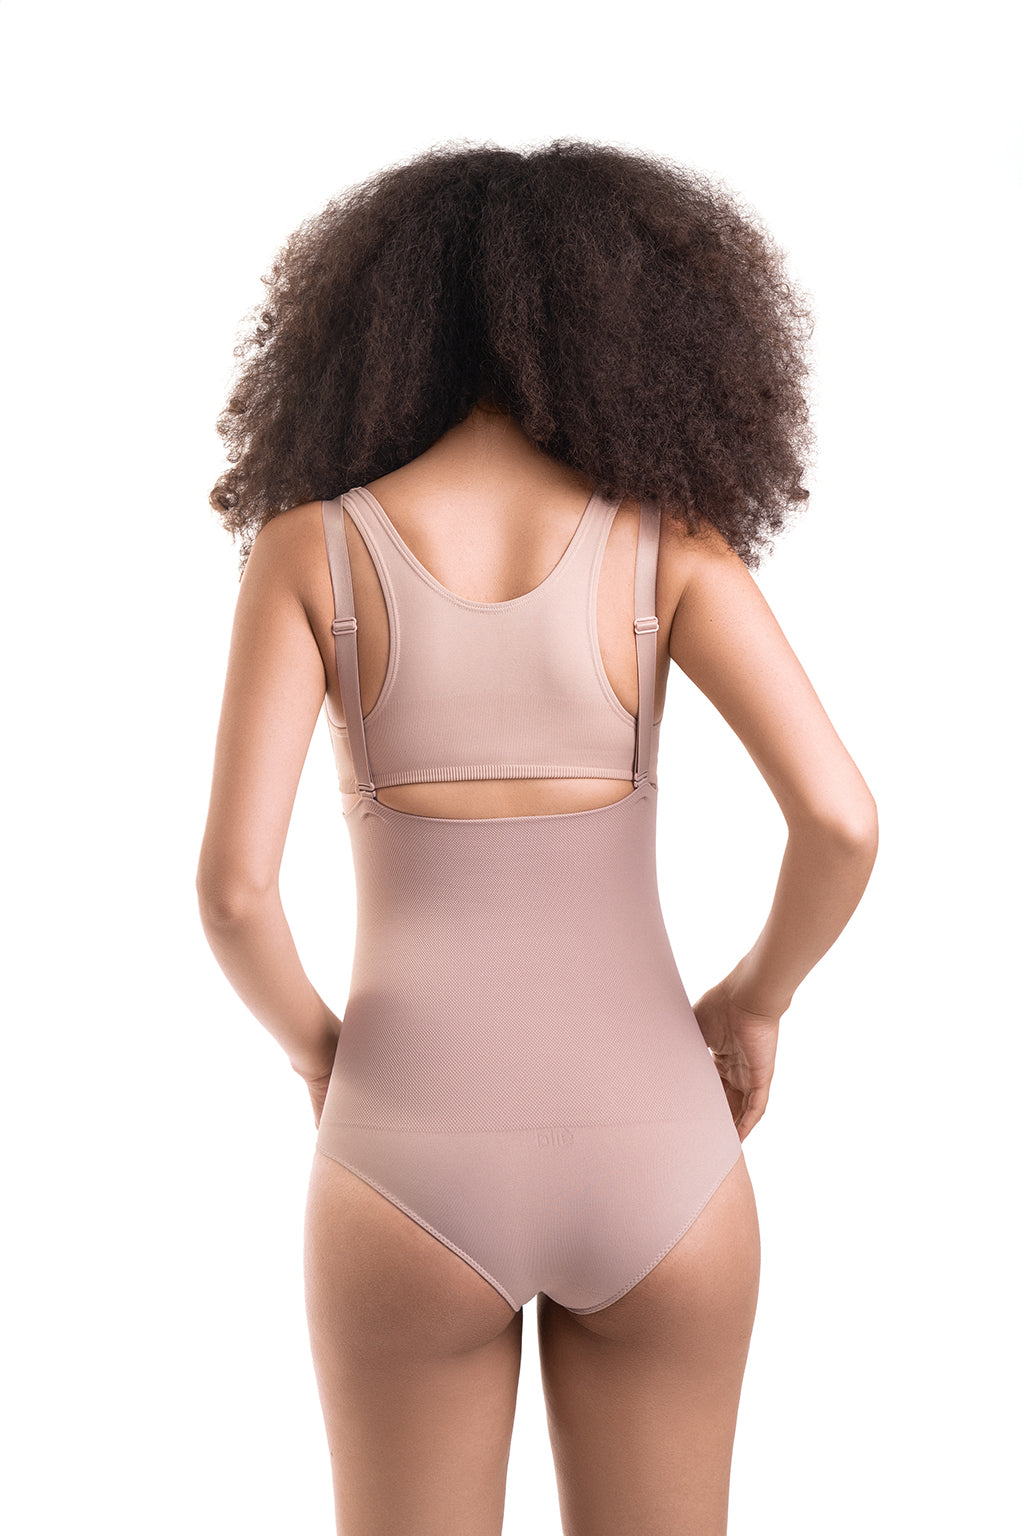 Loola Compression Aesthetic Waist Corset with Side Opening